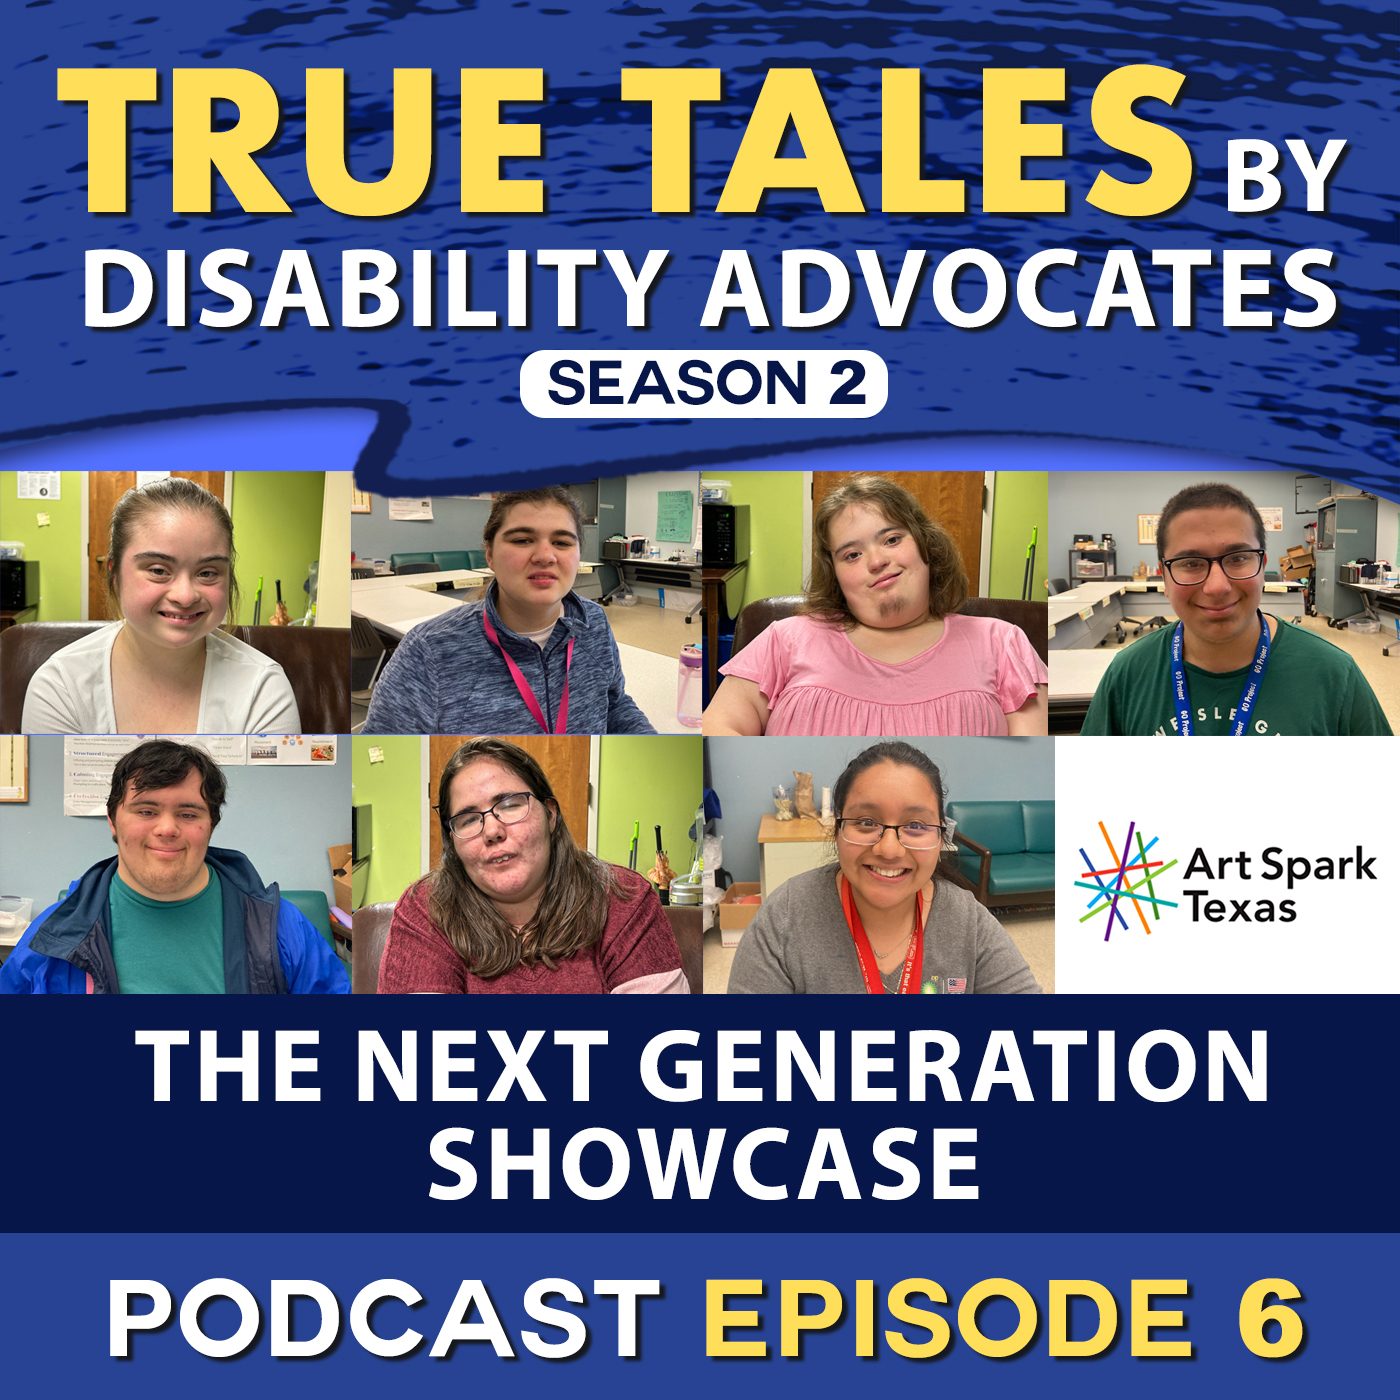 True Tales podcast episode six promotional graphic shows Photos of seven individuals along with the text, "the next generation podcast."